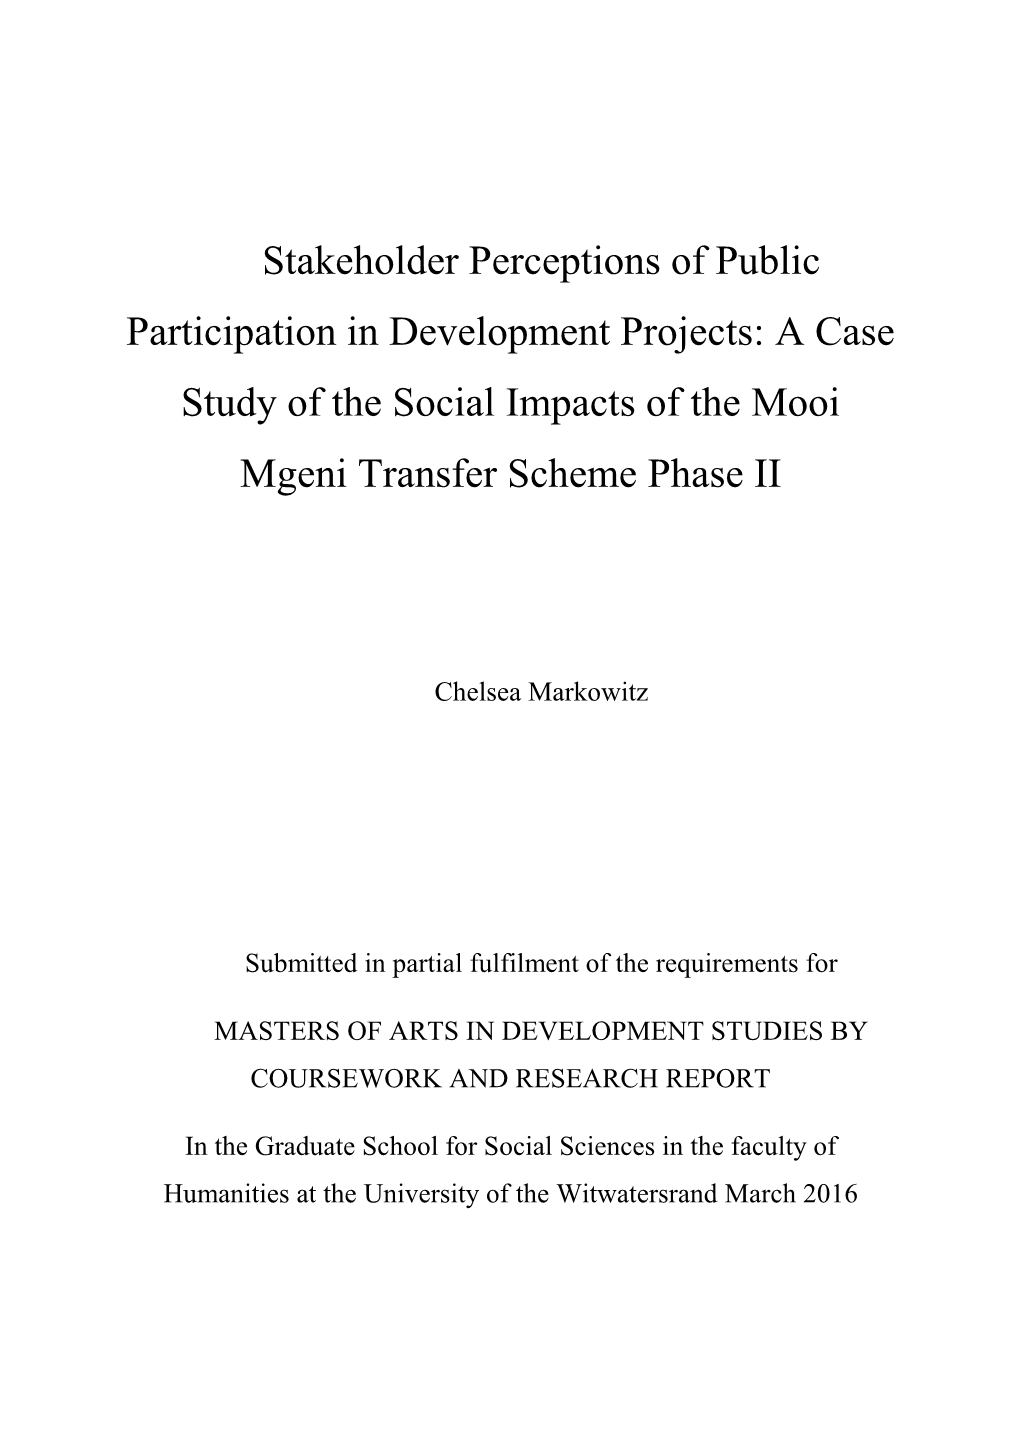 Stakeholder Perceptions of Public Participation in Development Projects: a Case Study of the Social Impacts of the Mooi Mgeni Transfer Scheme Phase II